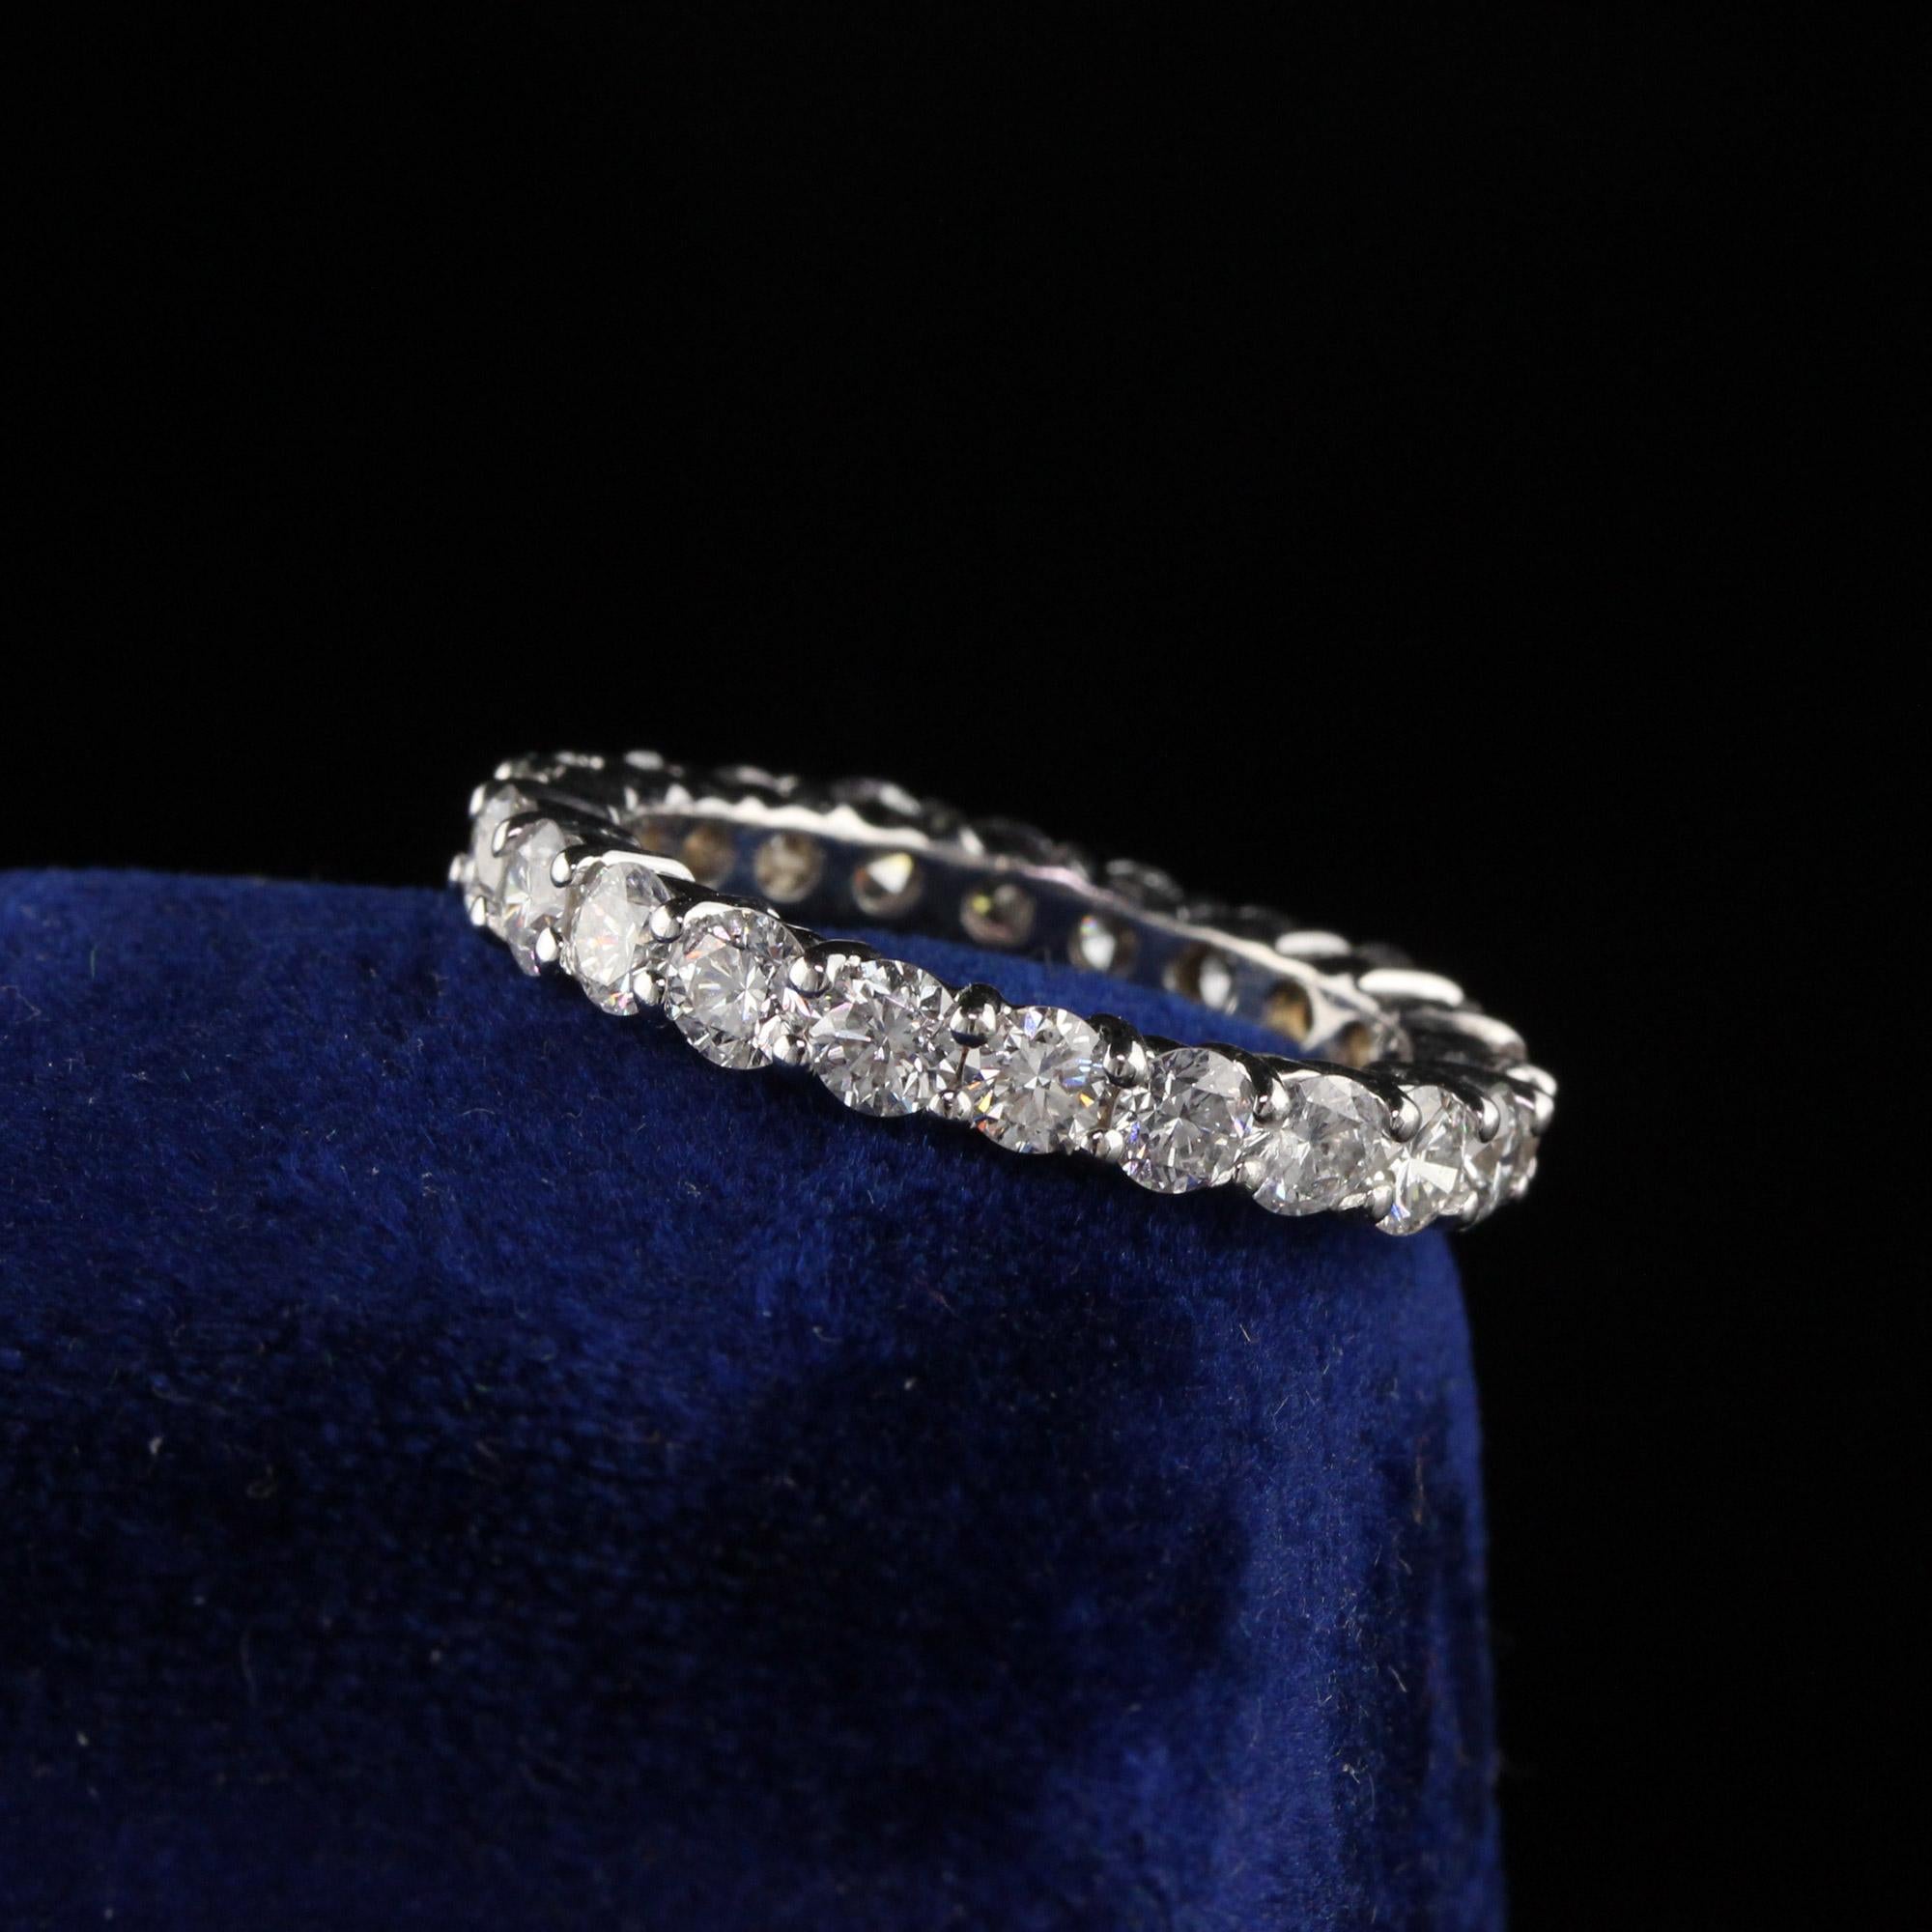 Round diamonds set in a beautiful eternity band 

Metal: White Gold

Weight: 4.3 Grams

Total Diamond Weight: Approximately 2.50 cts

Diamond Color: H

Diamond Clarity: VS2-SI1

Ring Size: 6.75

Measurements: 3.2 x 3.3 mm
